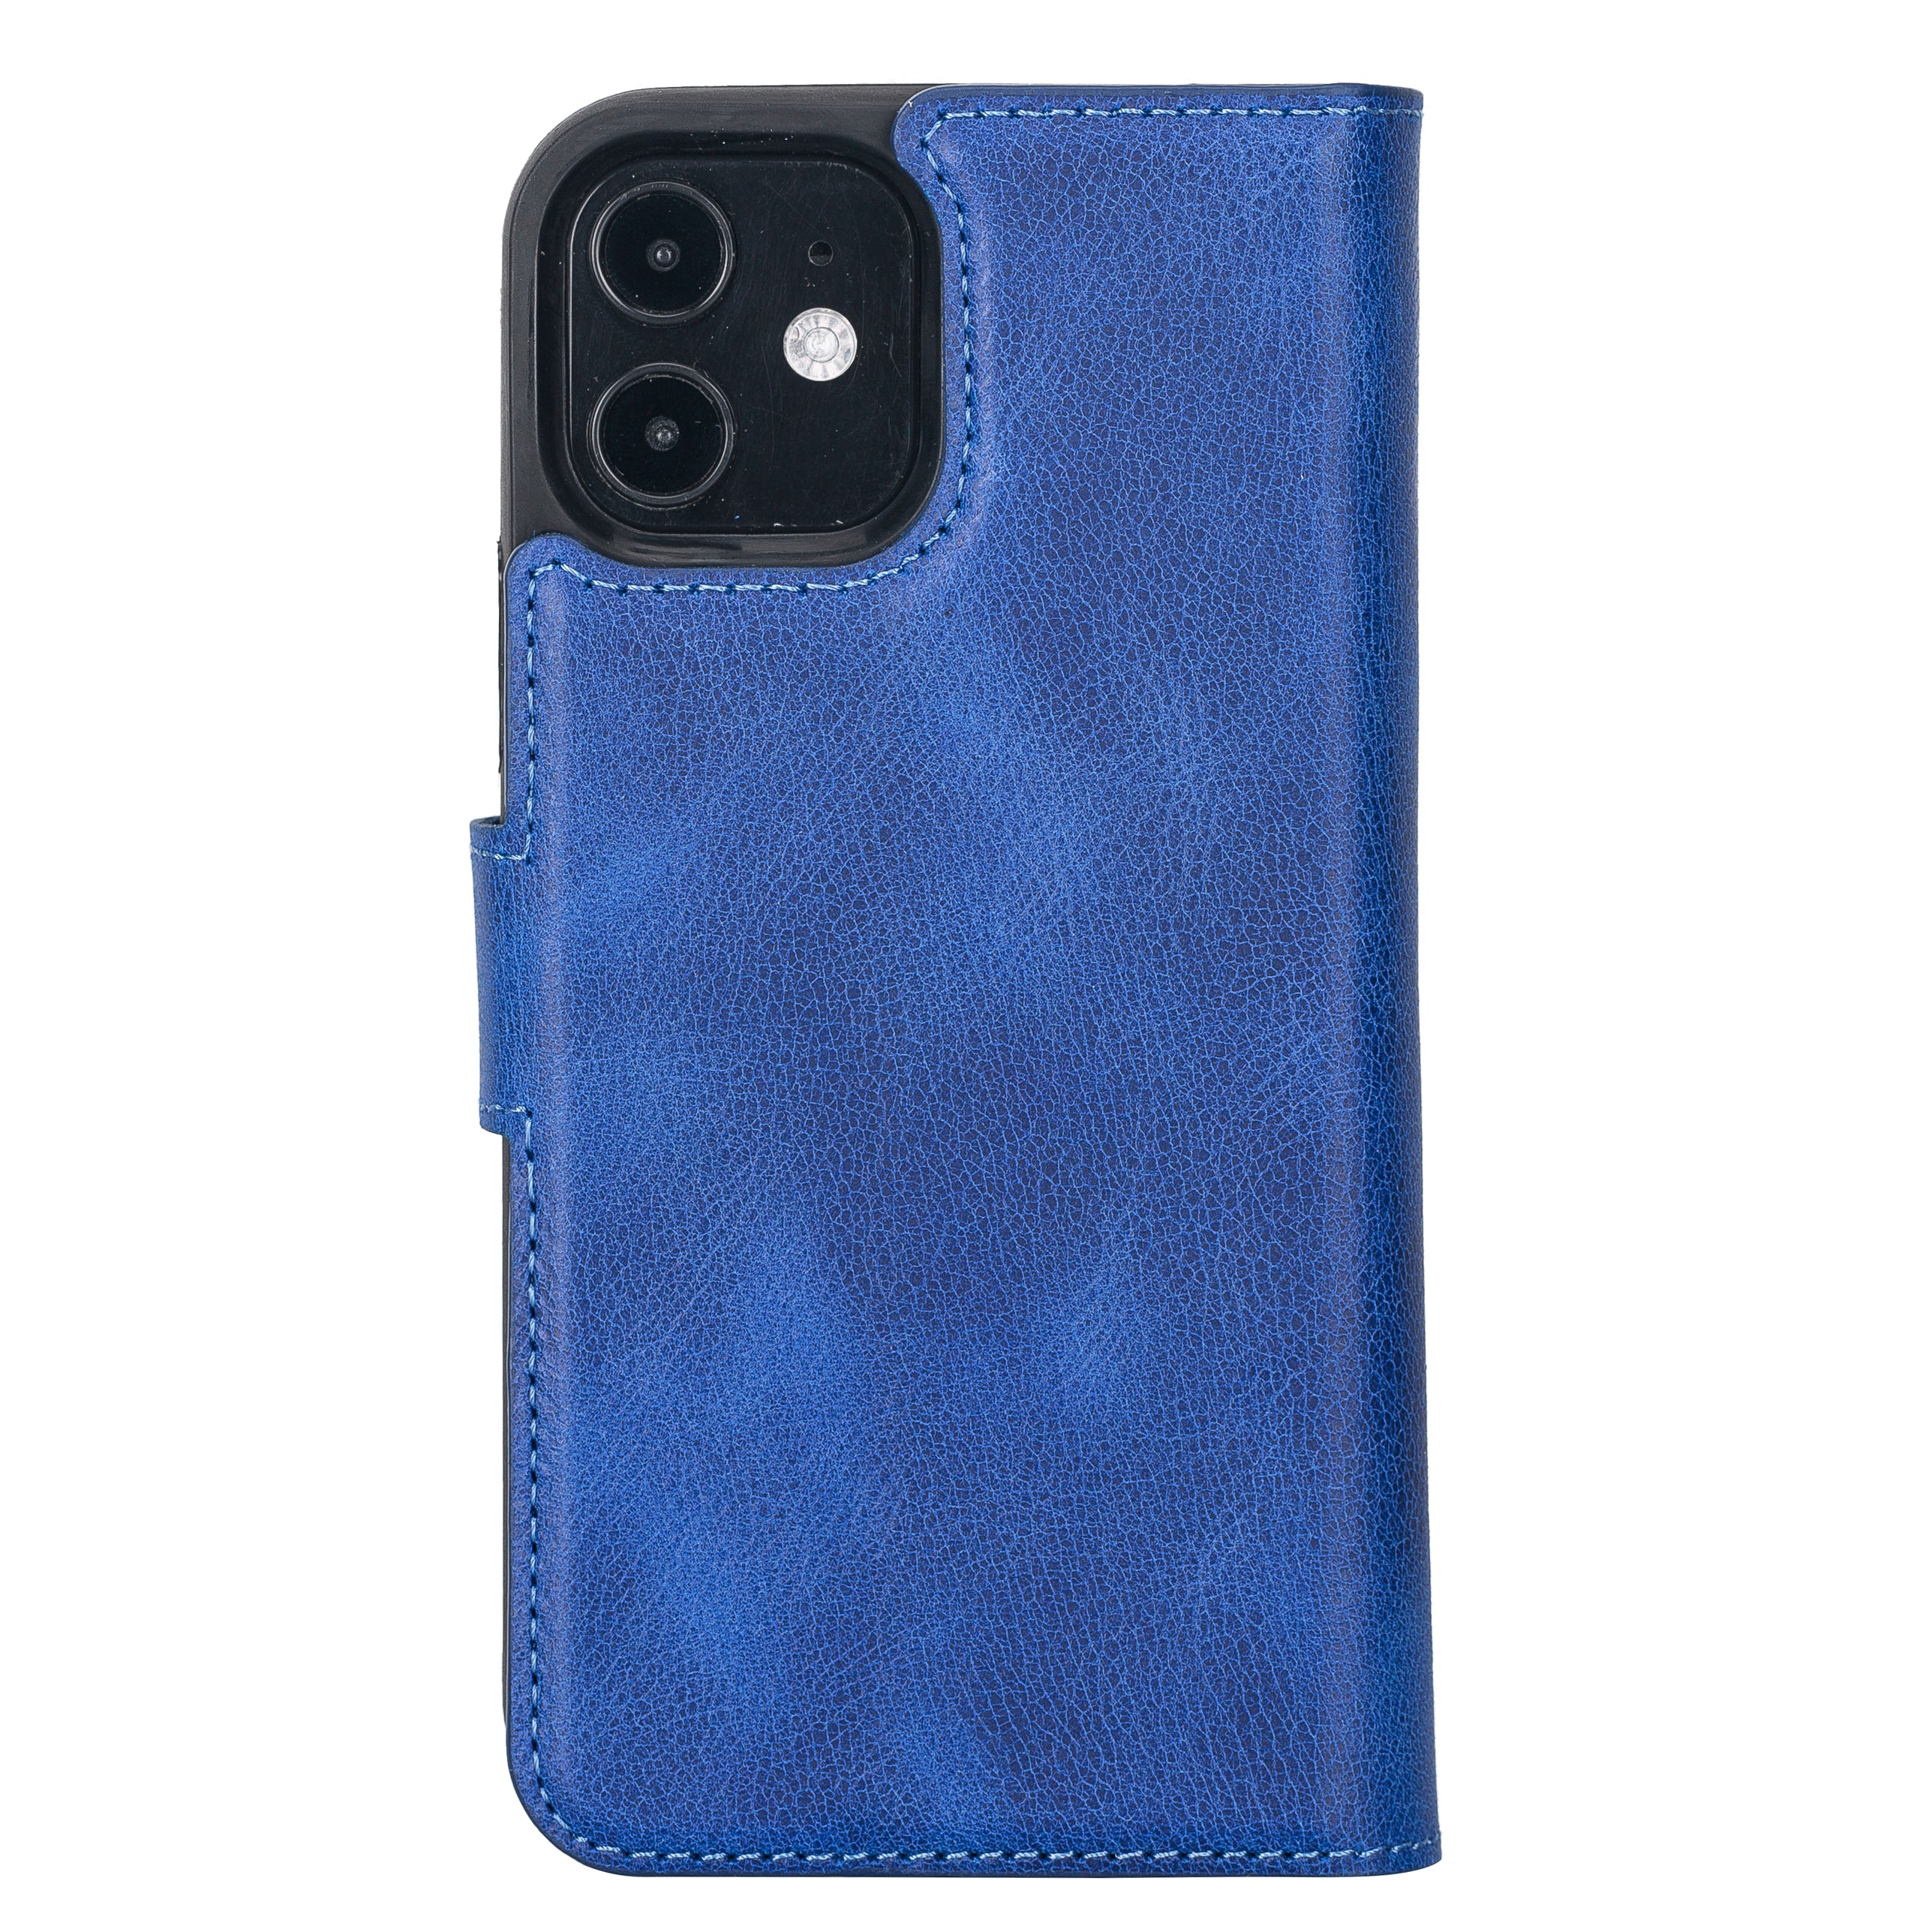 DelfiCase Magnetic Detachable Leather Wallet Case for iPhone 12 and iPhone 12 Pro (6.1") 51